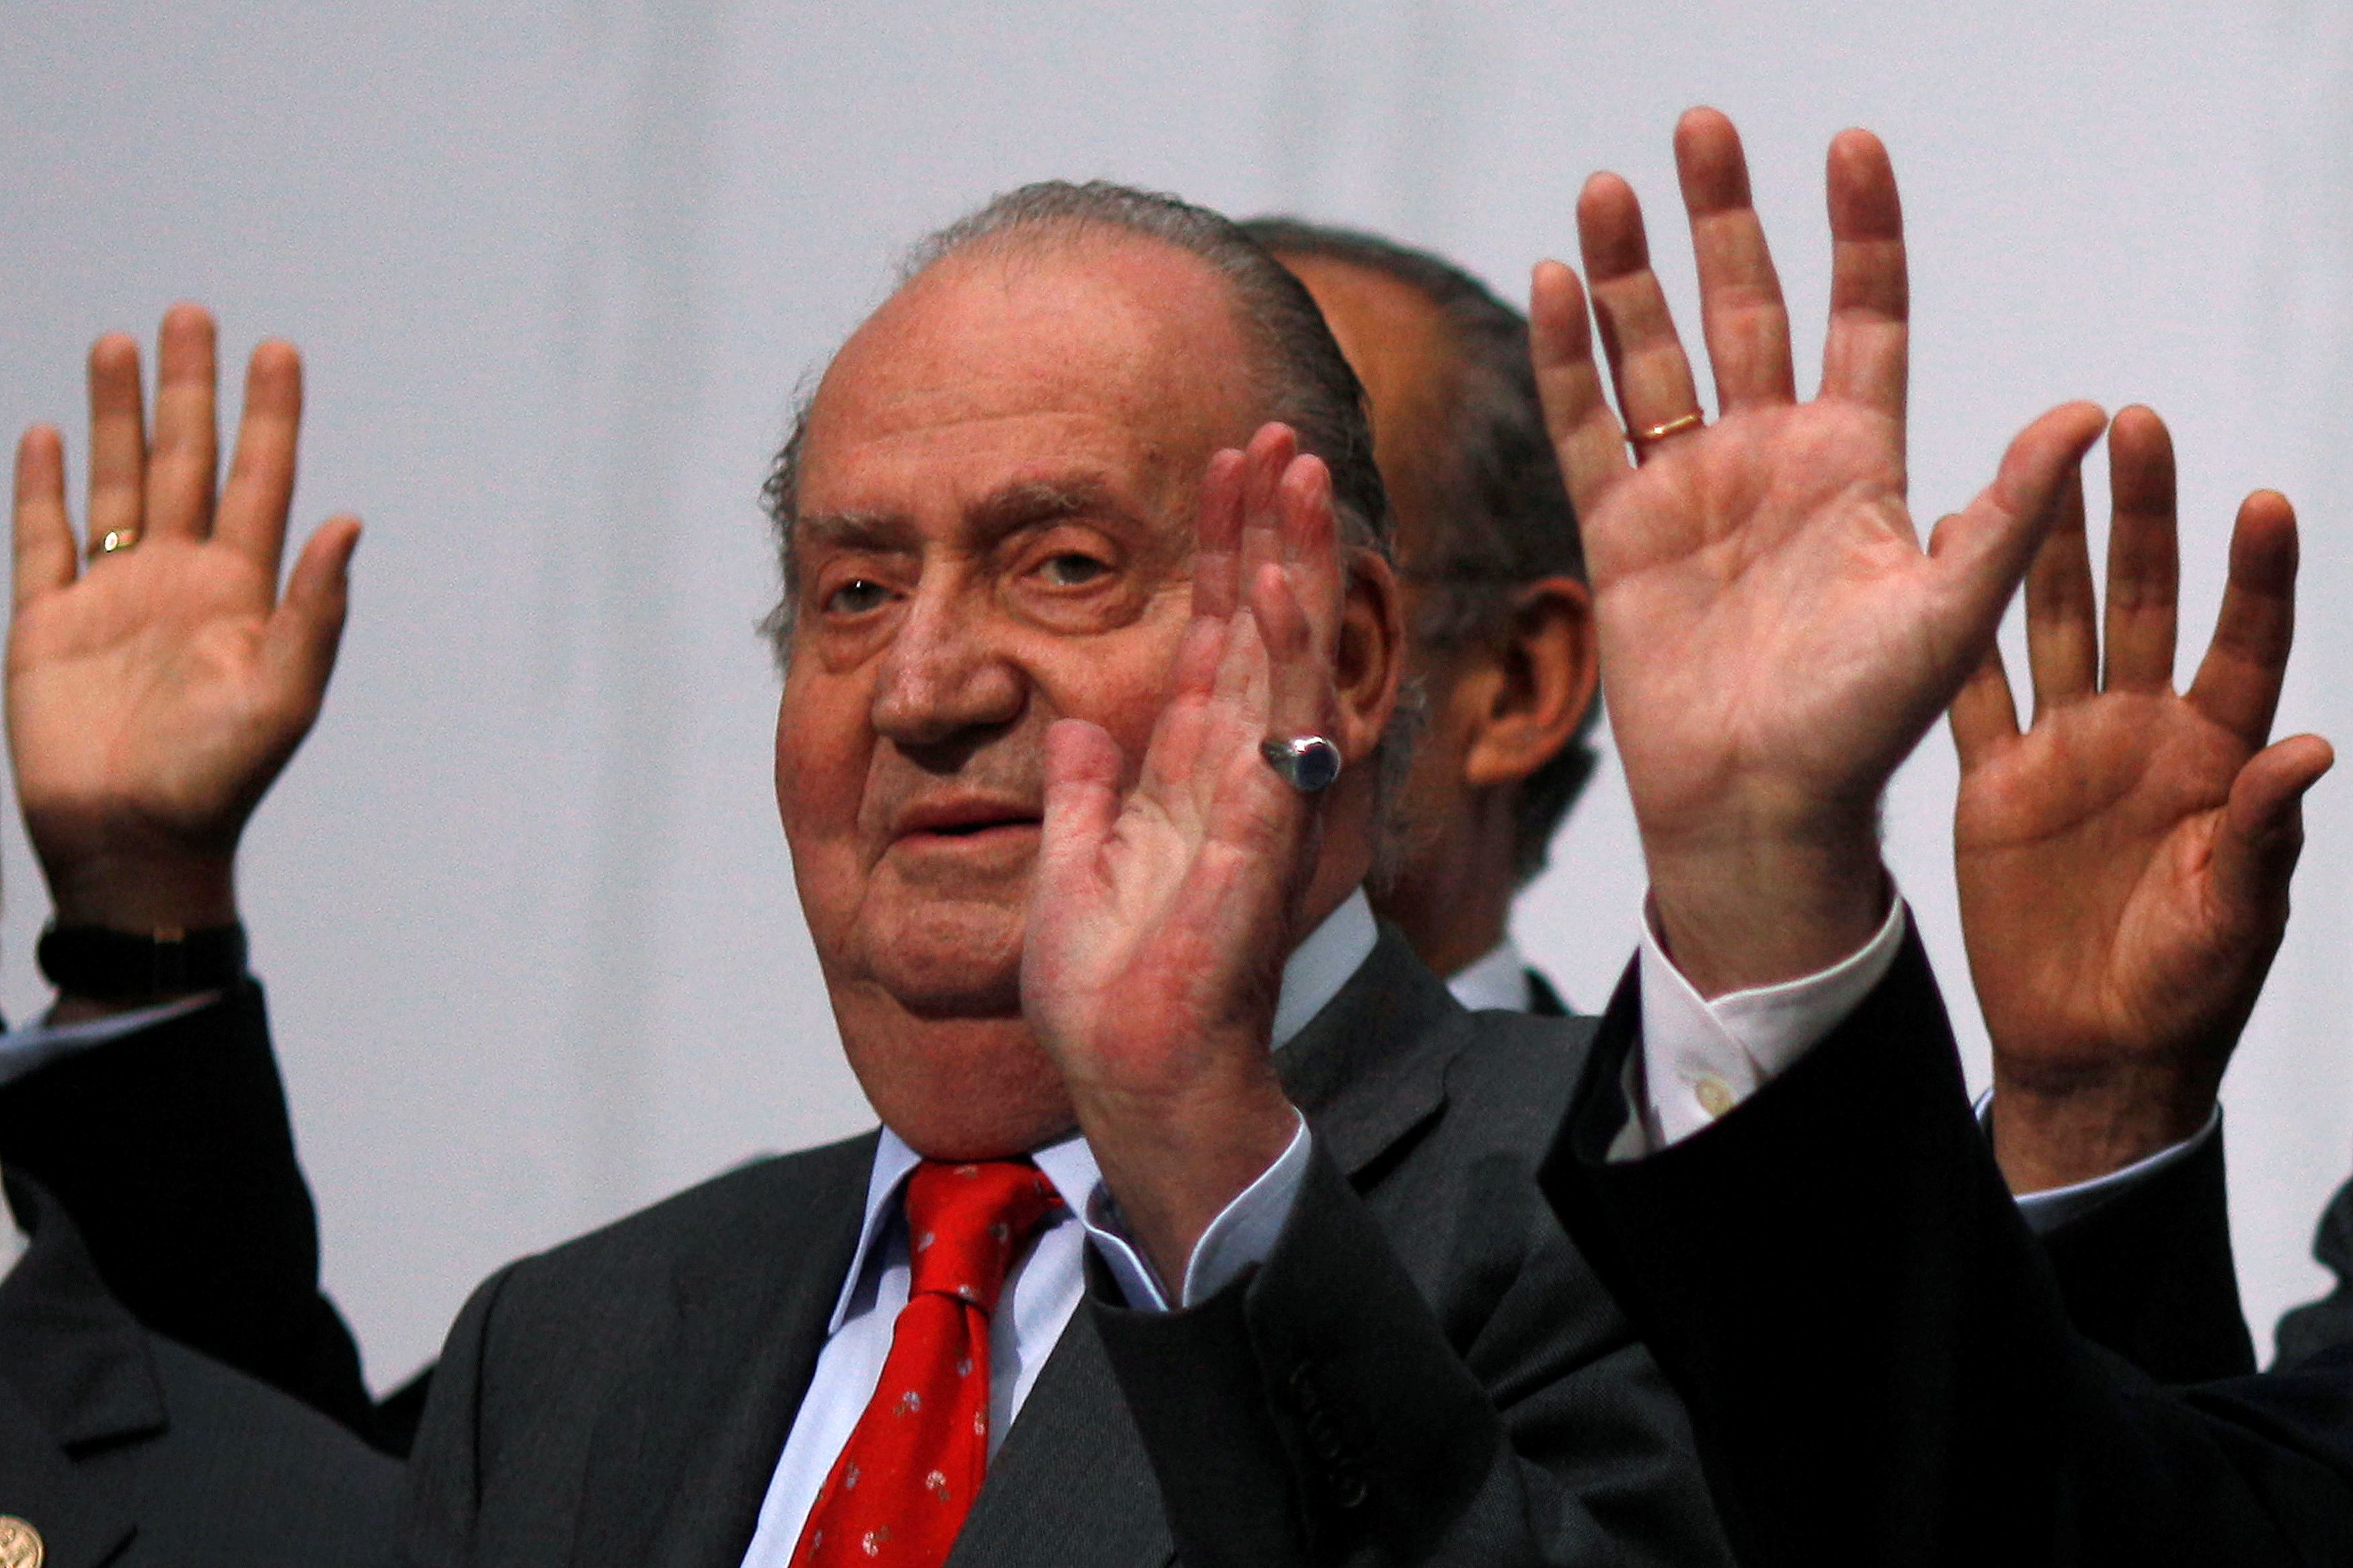 FILE PHOTO: Spanish King Juan Carlos waves during a group photo with Ibero-American leaders during the Ibero-American Summit in Cadiz, southern Spain November 17, 2012. REUTERS/Jon Nazca/File Photo